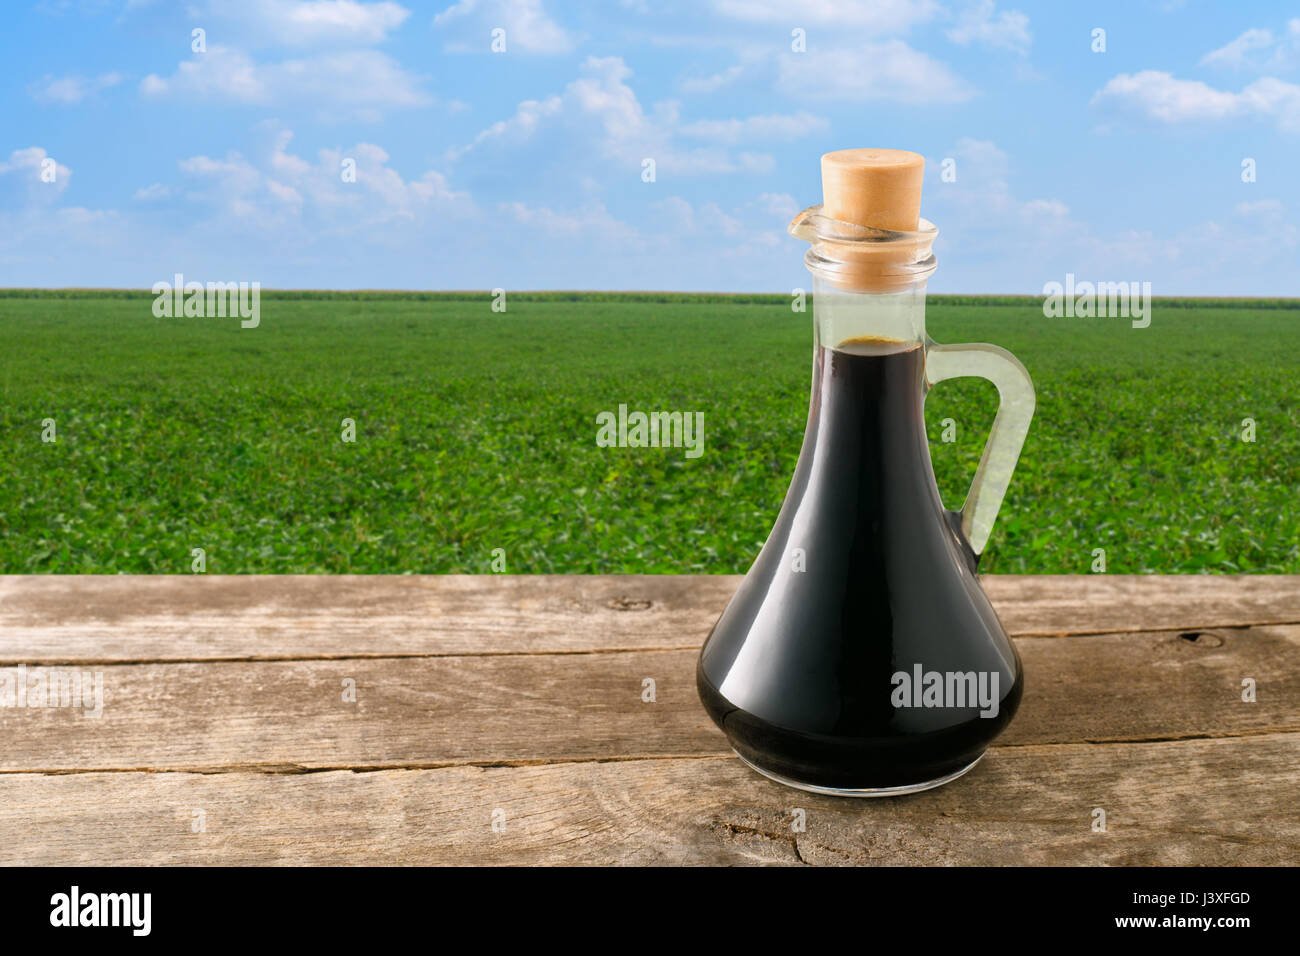 soy sauce in glass bottle on wooden table with green field on the background. Soybean field with blue sky. Photo with copy space area for a text. Seas Stock Photo